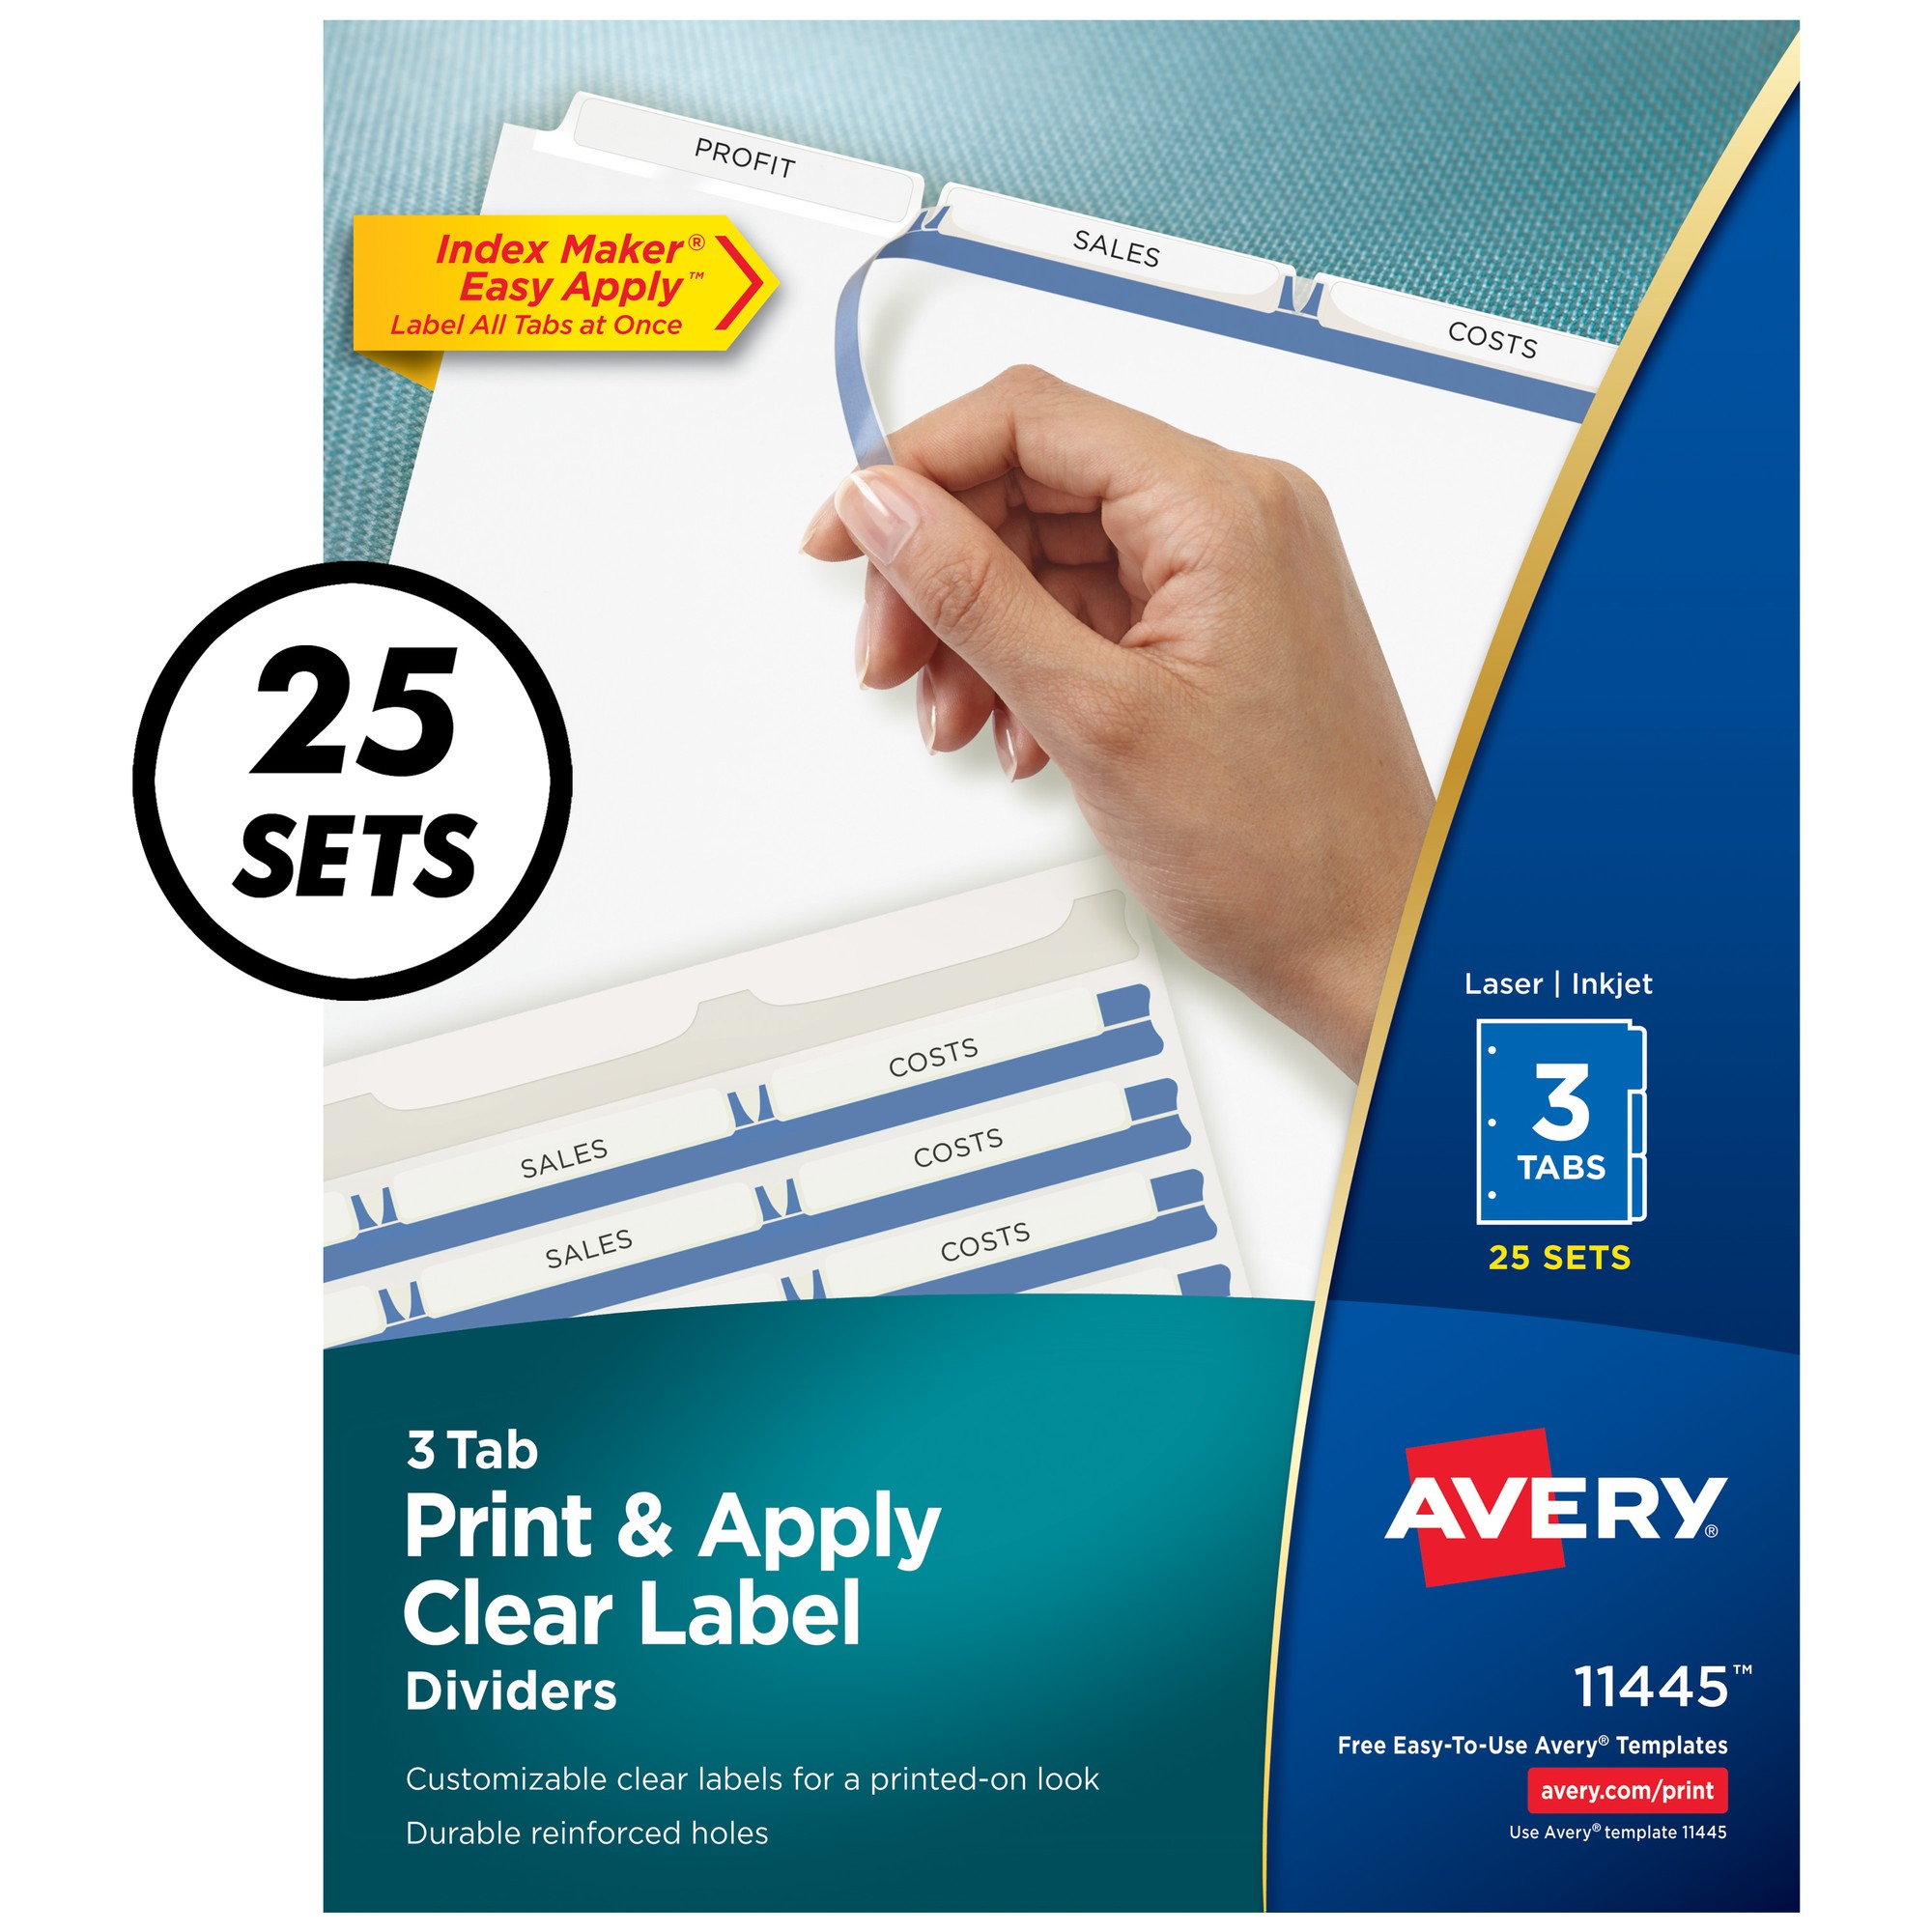 Avery Print & Apply Clear Label Dividers - Index Maker Easy Apply Label Strip - 75 x Divider(s) - 3 Blank Tab(s) - 3 Tab(s)